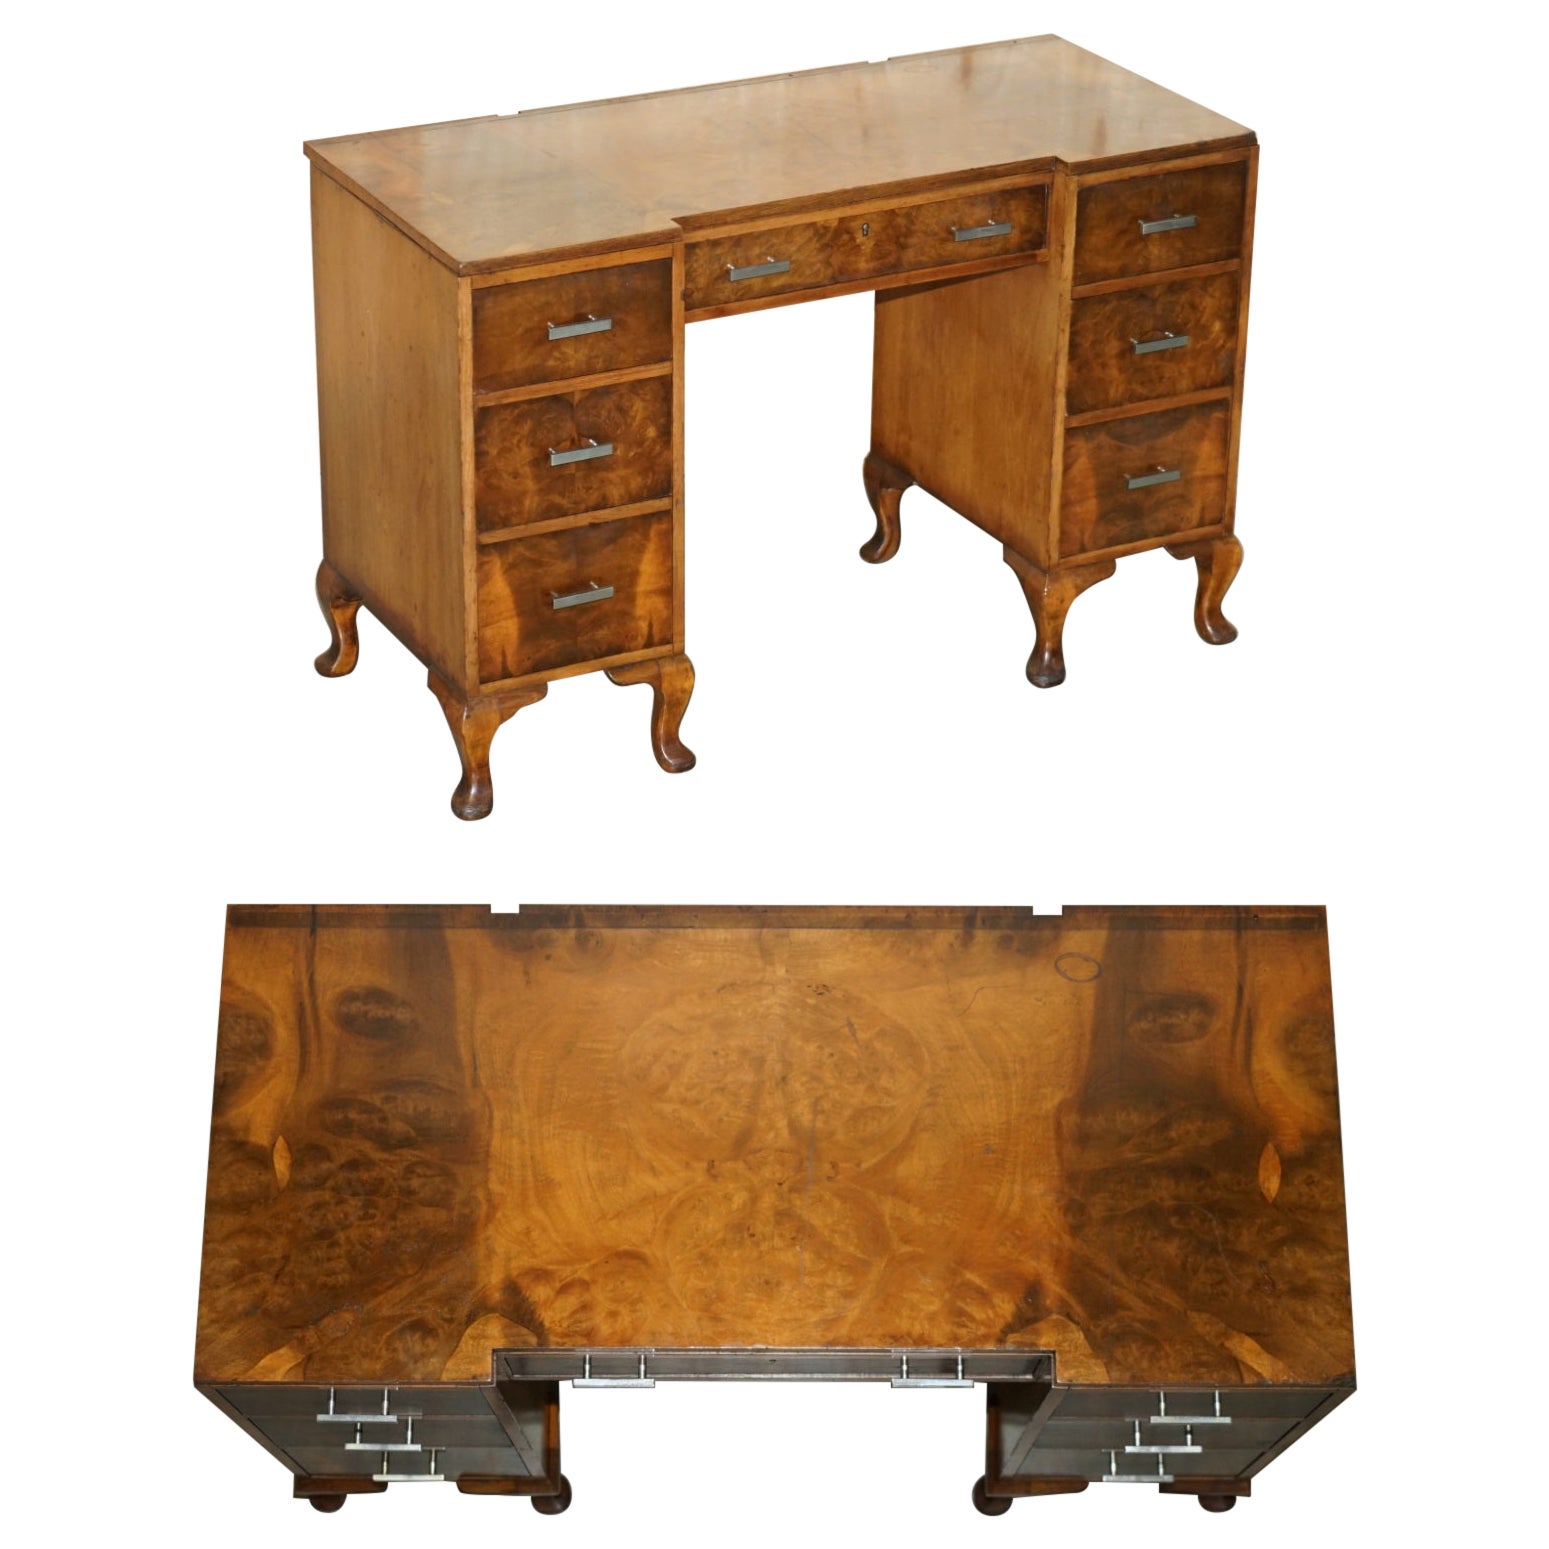 FINE ANTIQUE ART DECO WARING & GILLOW 1932 STAMPED BURR WALNUT DRESSiNG TABLE For Sale